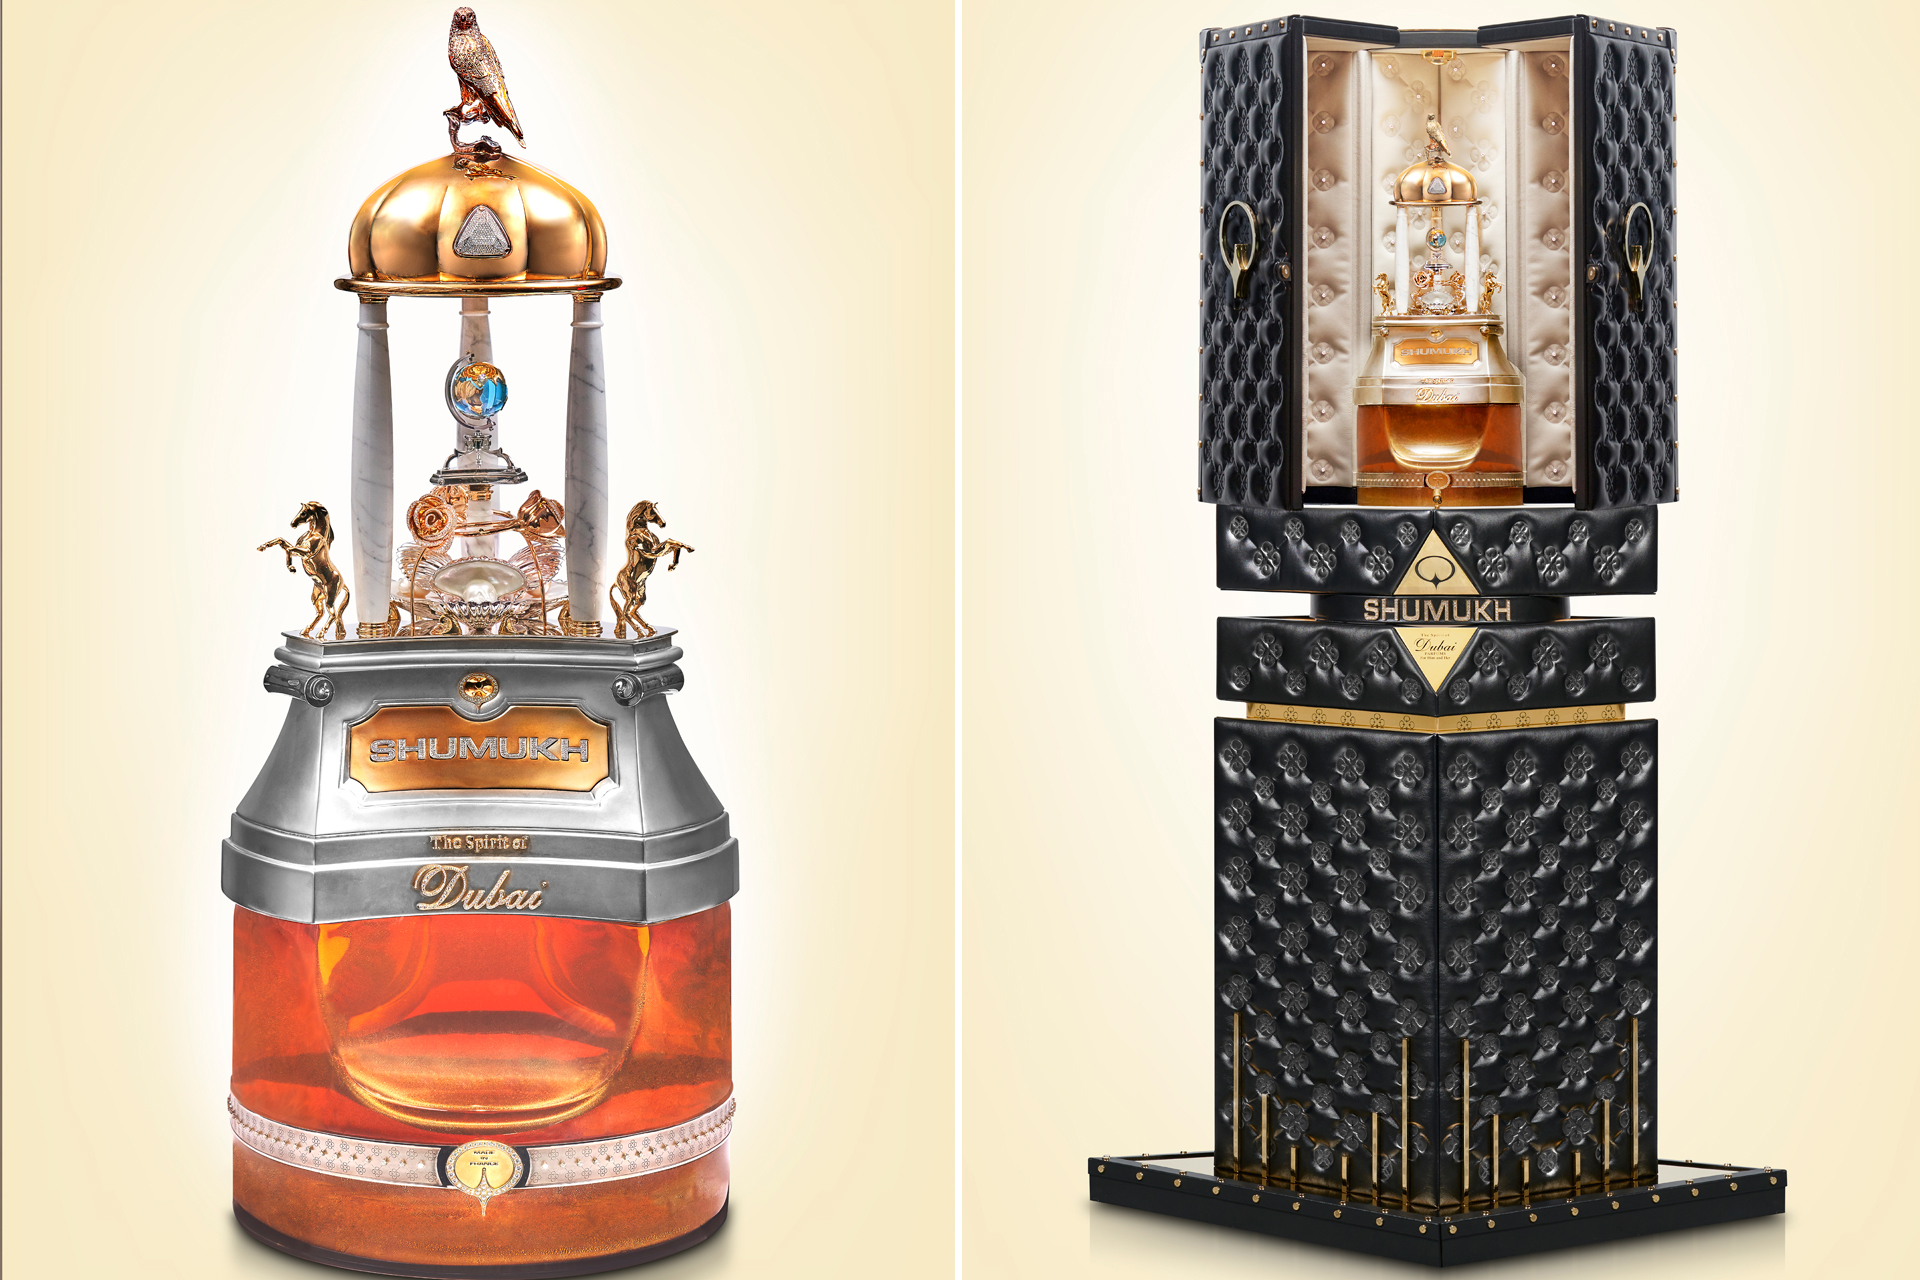 The world's most expensive perfume has launched at The Dubai Mall